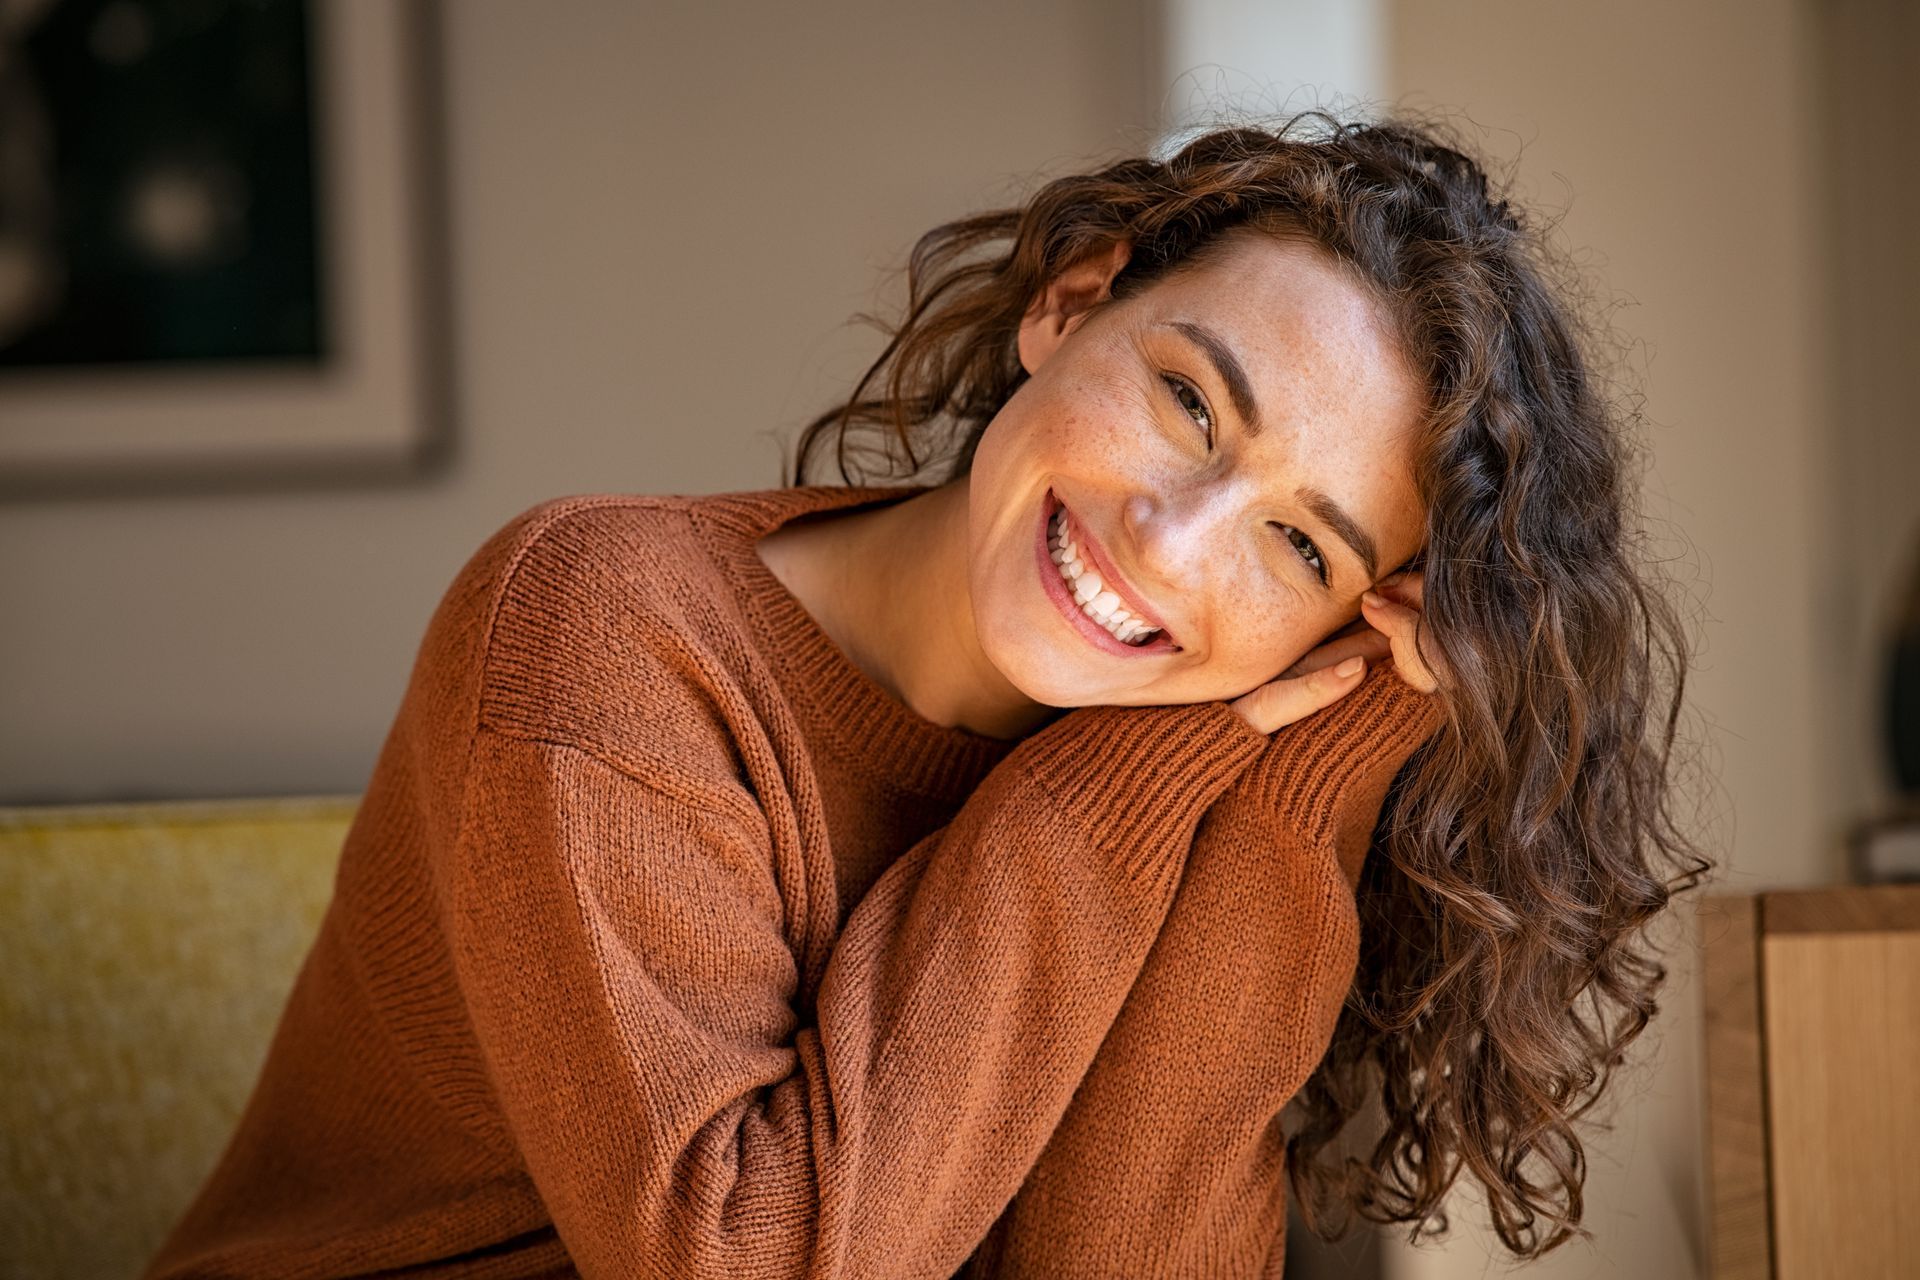 a woman in a brown sweater is smiling while sitting on a couch .